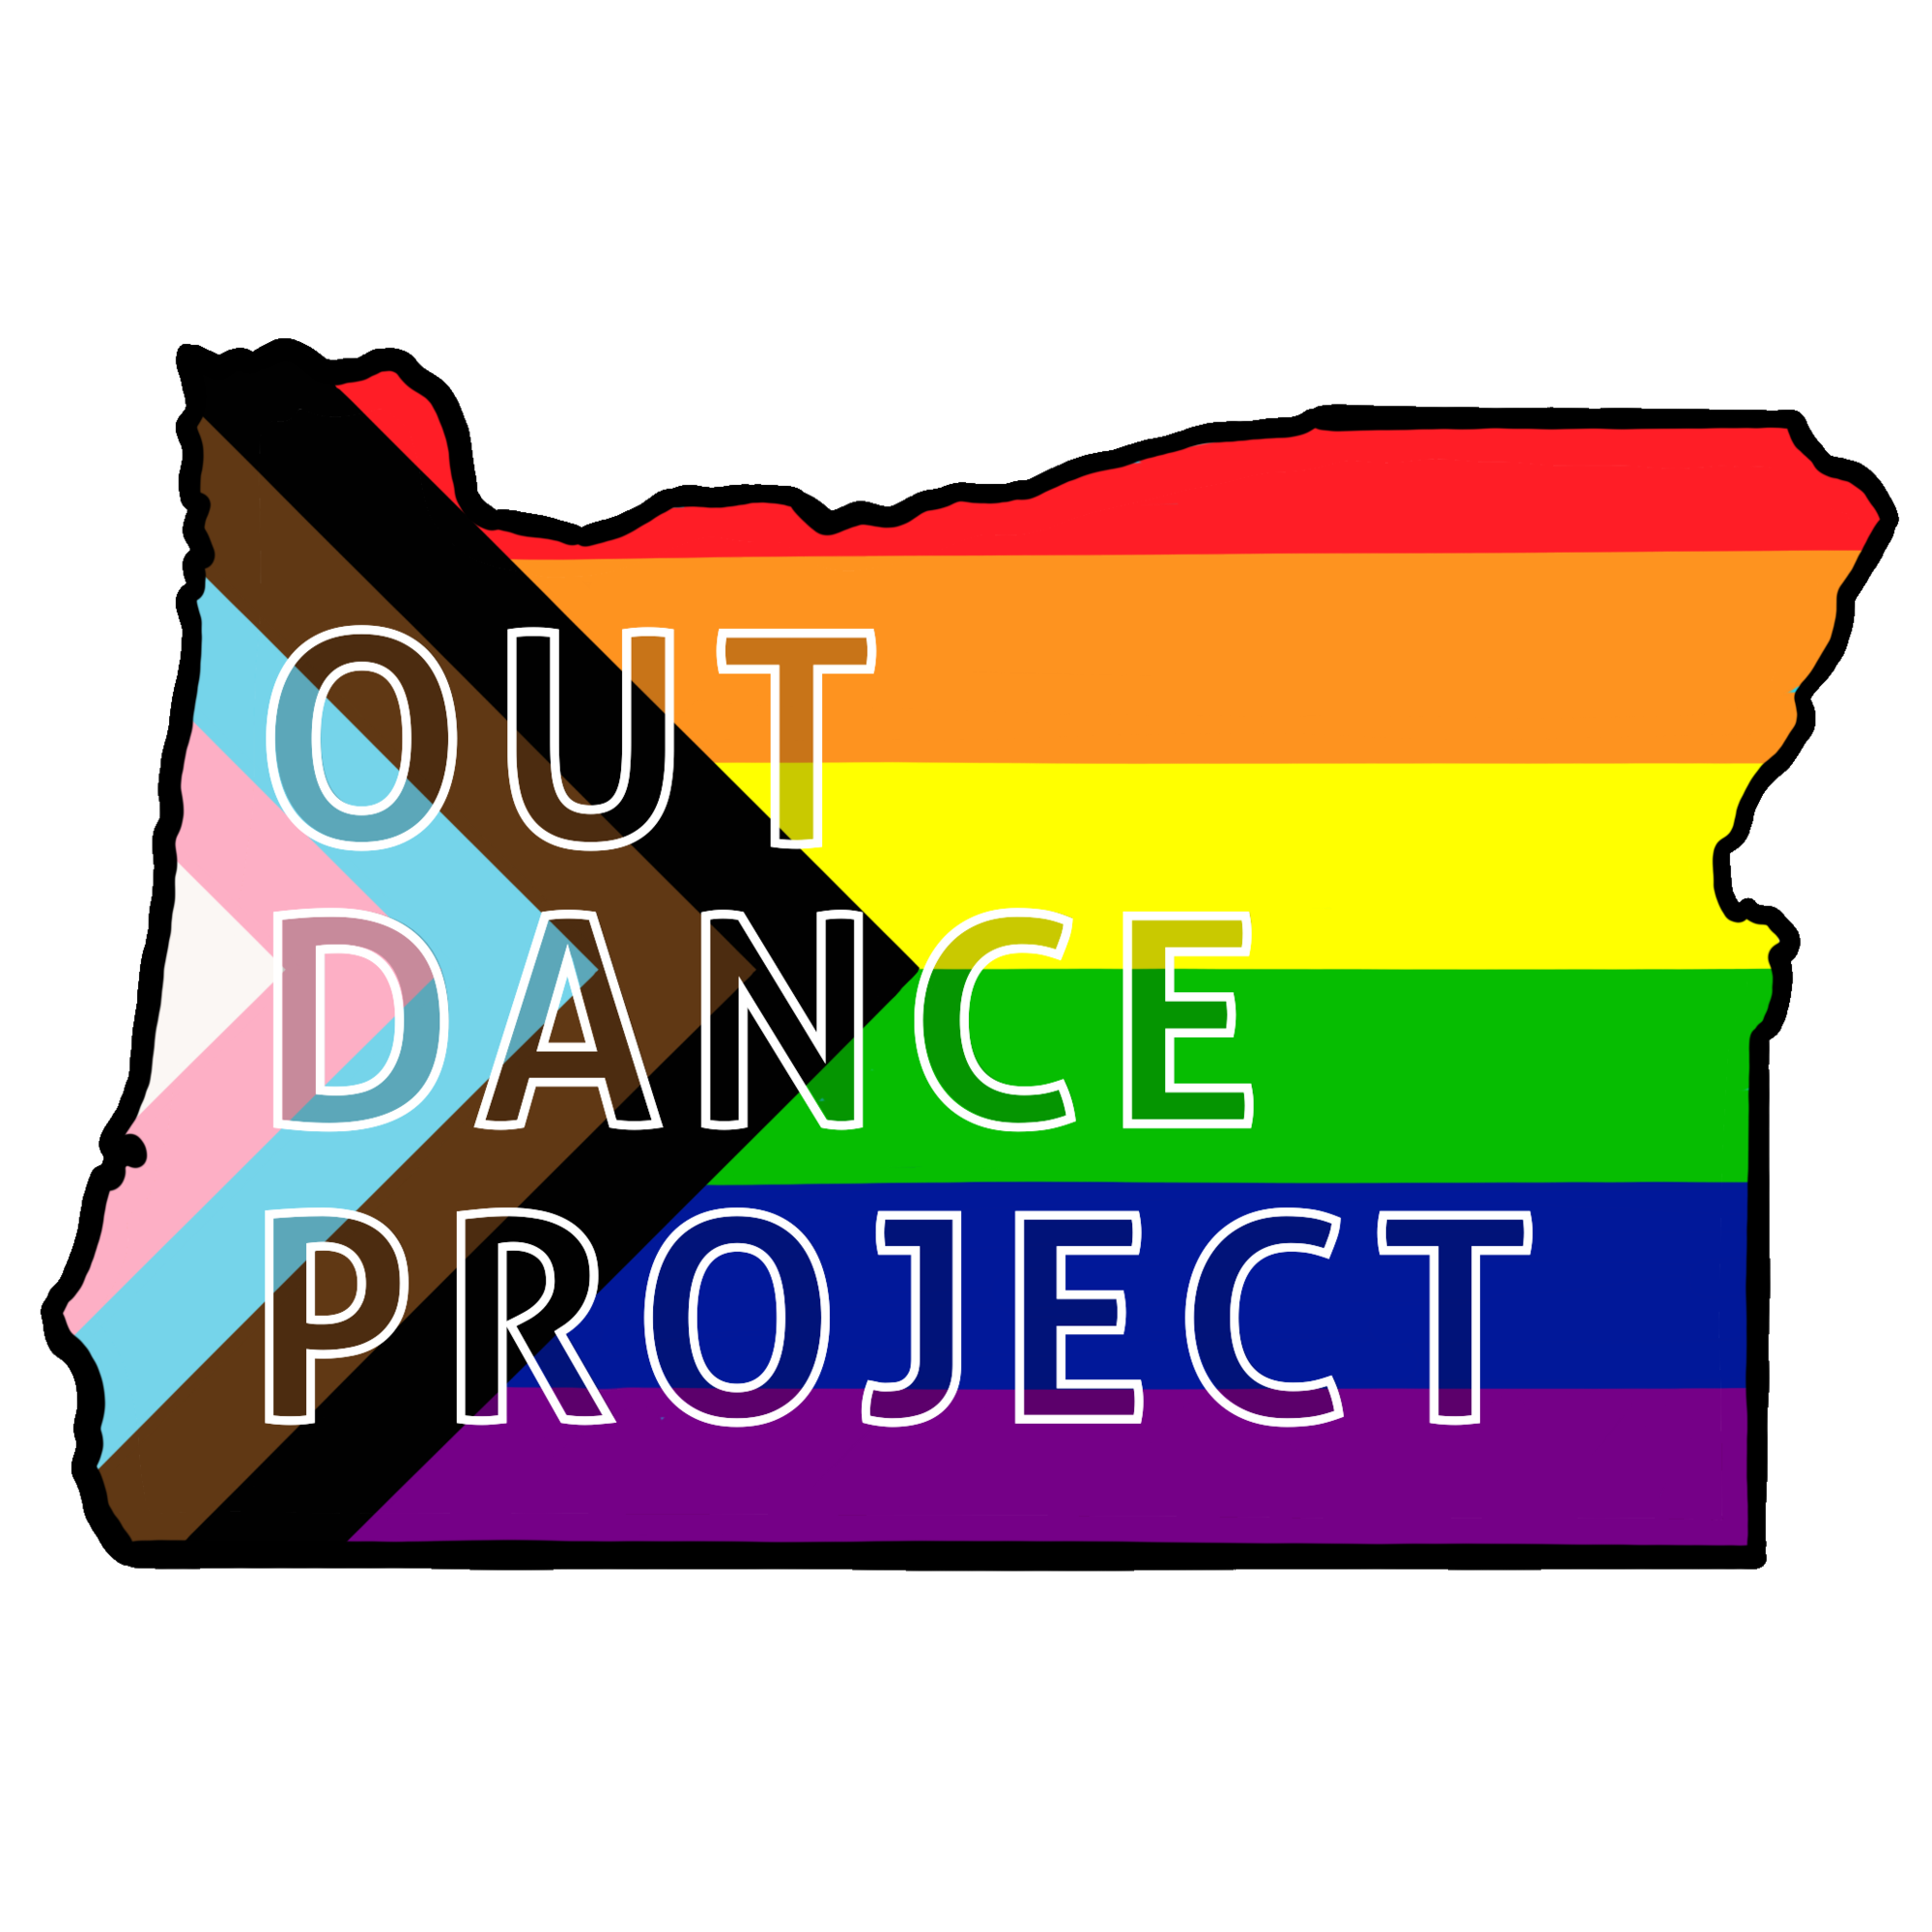 outline of oregon state with pride flag and text OUT DANCE PROJECT.